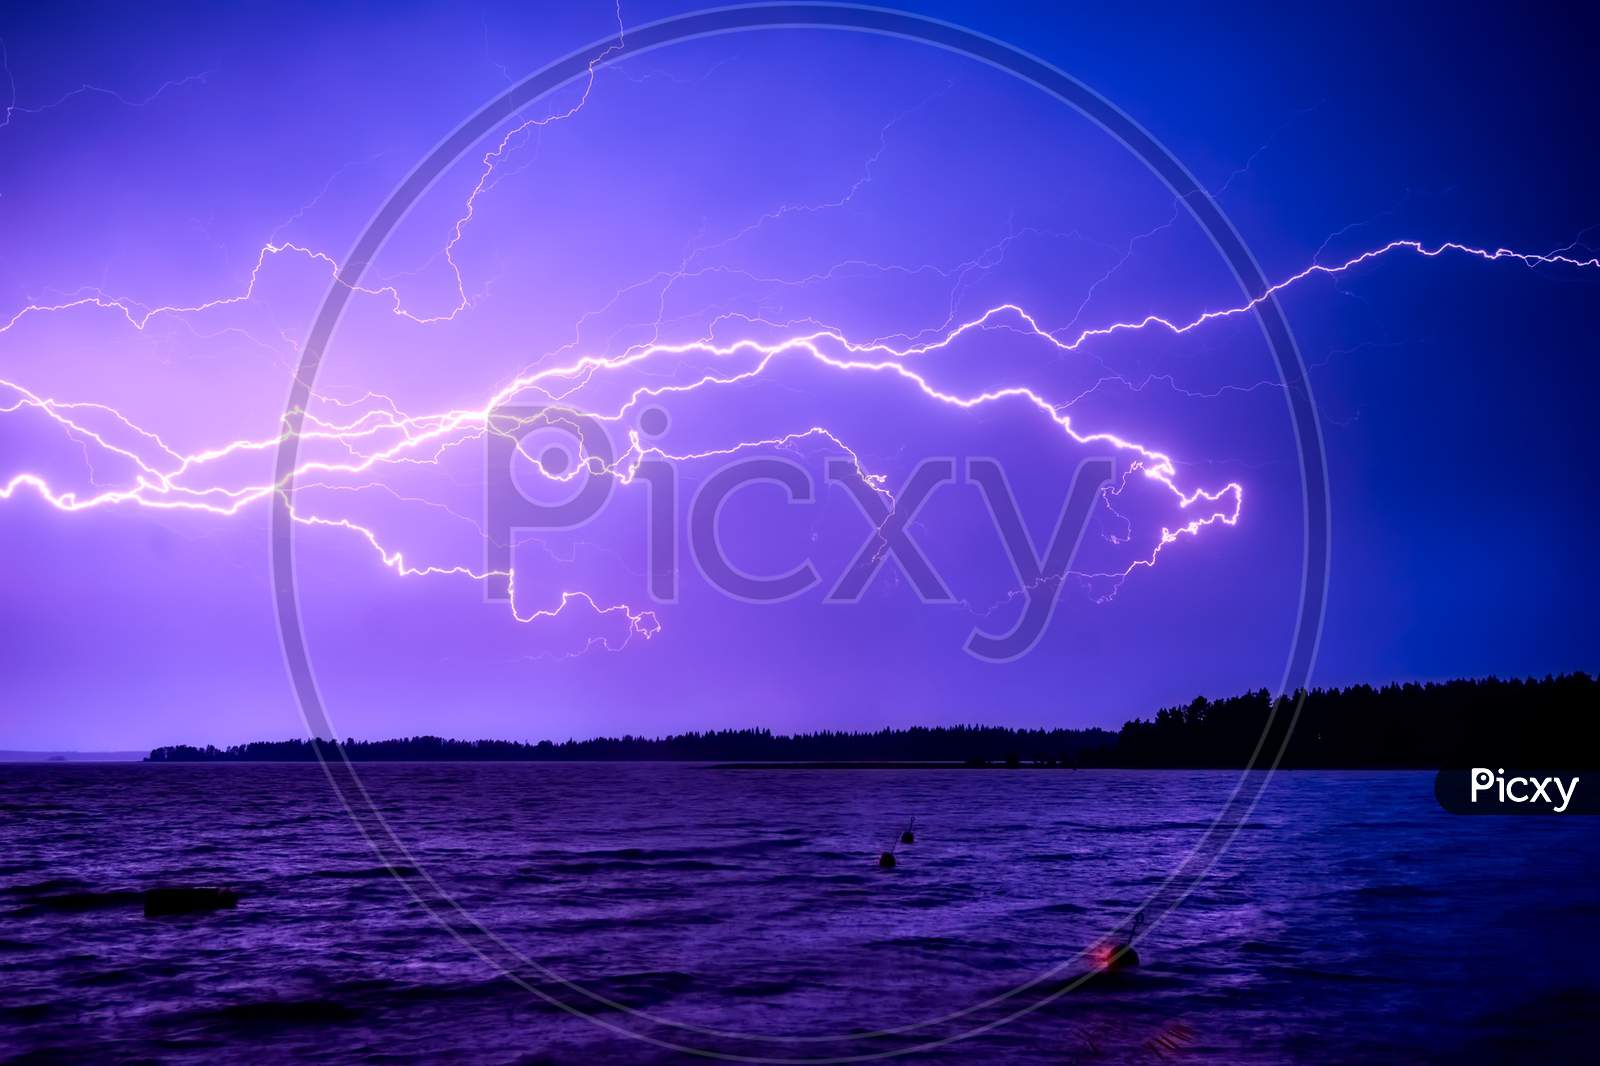 Lightning over the sky- blue coloured lightning in the sky-lightning, storm, thunder, electricity, sky, bolt, electric,purple flash, weather, thunderstorm, night, abstract, light, rain, strike, energy, nature, cloudy day